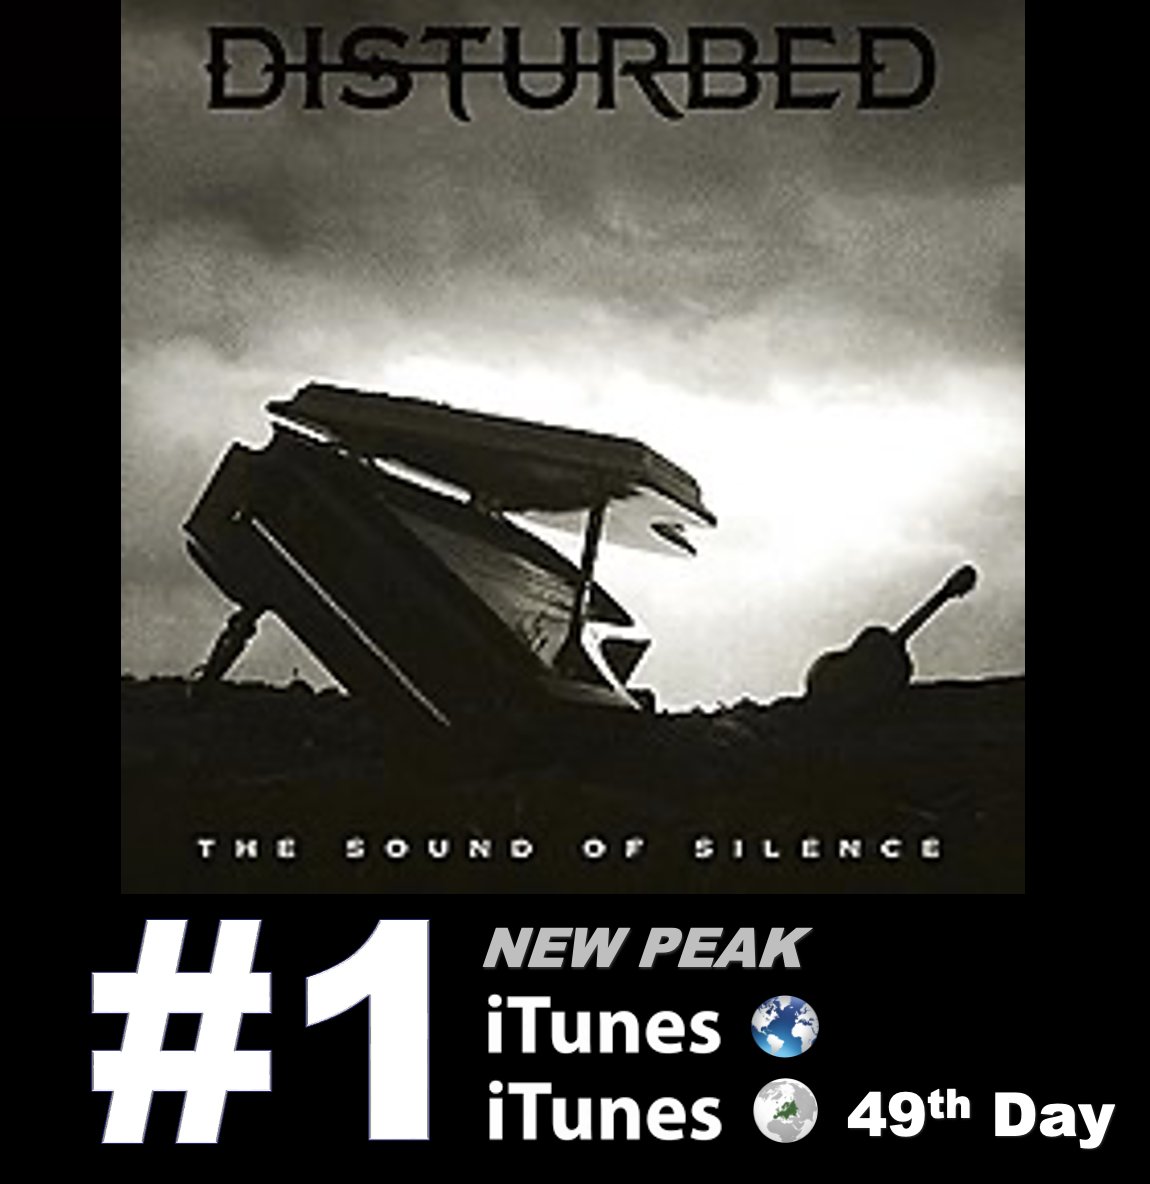 #DISTURBED's powerful cover of Simon & Garfunkel's 'The Sound of Silence' hits #1 for the very first time on the Worldwide iTunes song chart and tops the European iTunes song chart for a 49th day! 💪🆕📈💥1⃣🥳🎉🌎🎧➕1⃣🇪🇺🎵✖️4⃣9⃣🕛👑👑👑❤️‍🔥